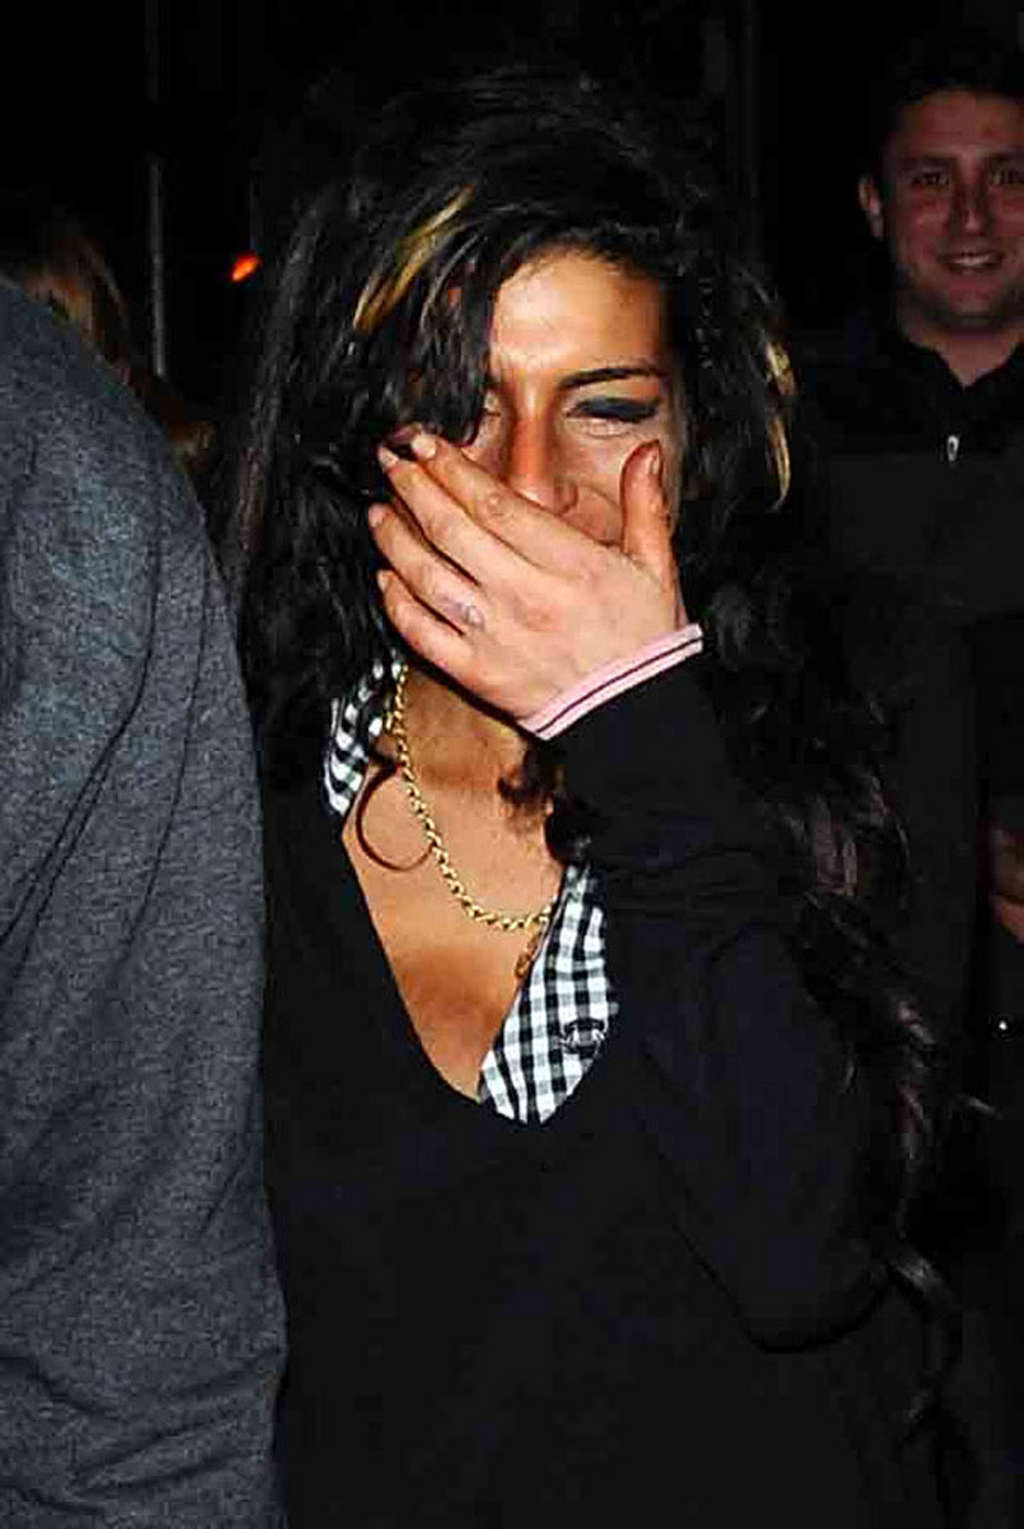 Amy Winehouse exposing huge boobs and looking very drunk #75346920